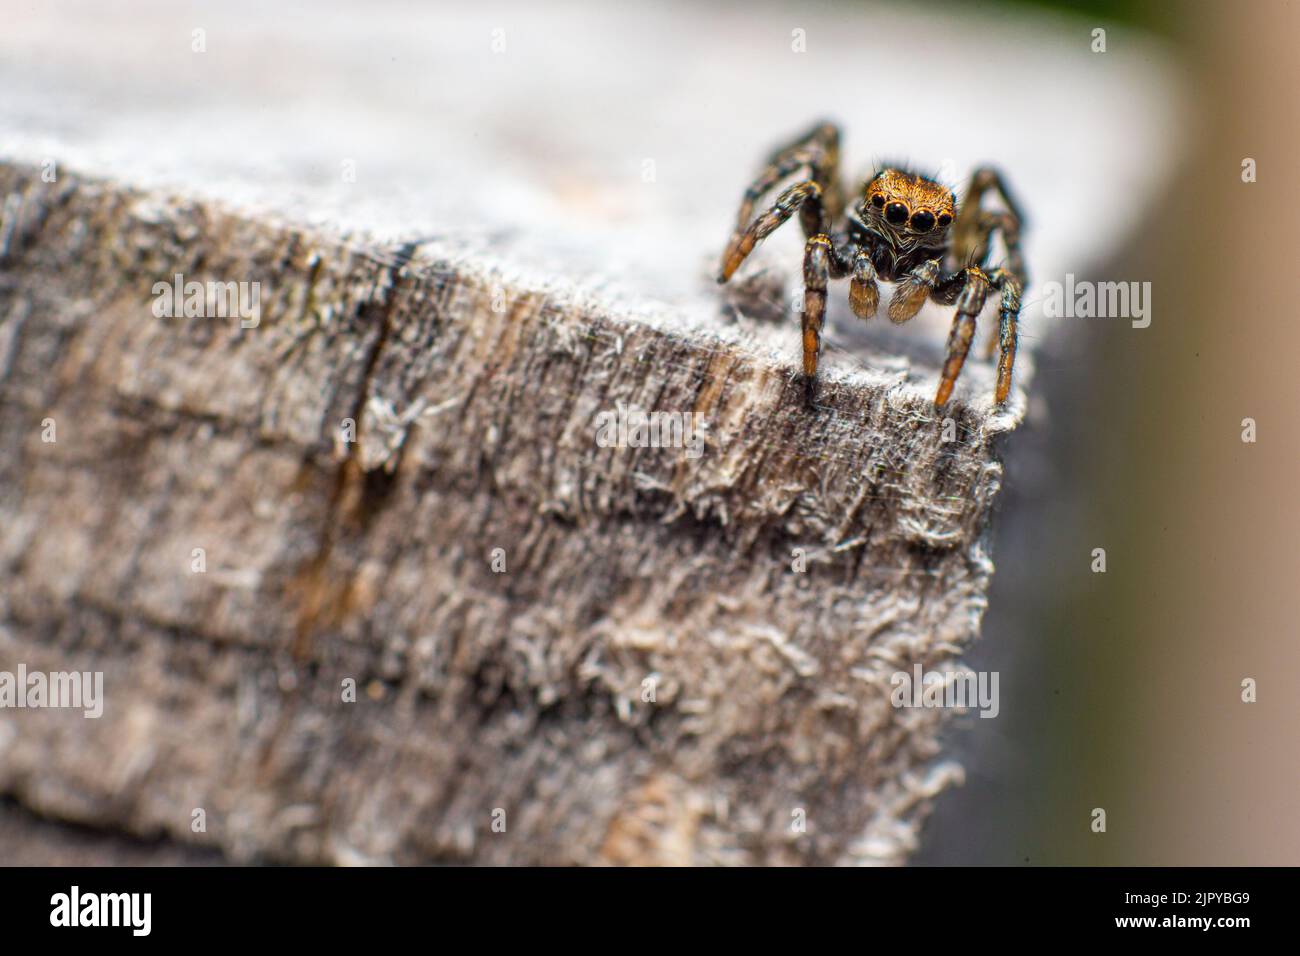 A Salticidae jumping spider on a piece of wood Stock Photo